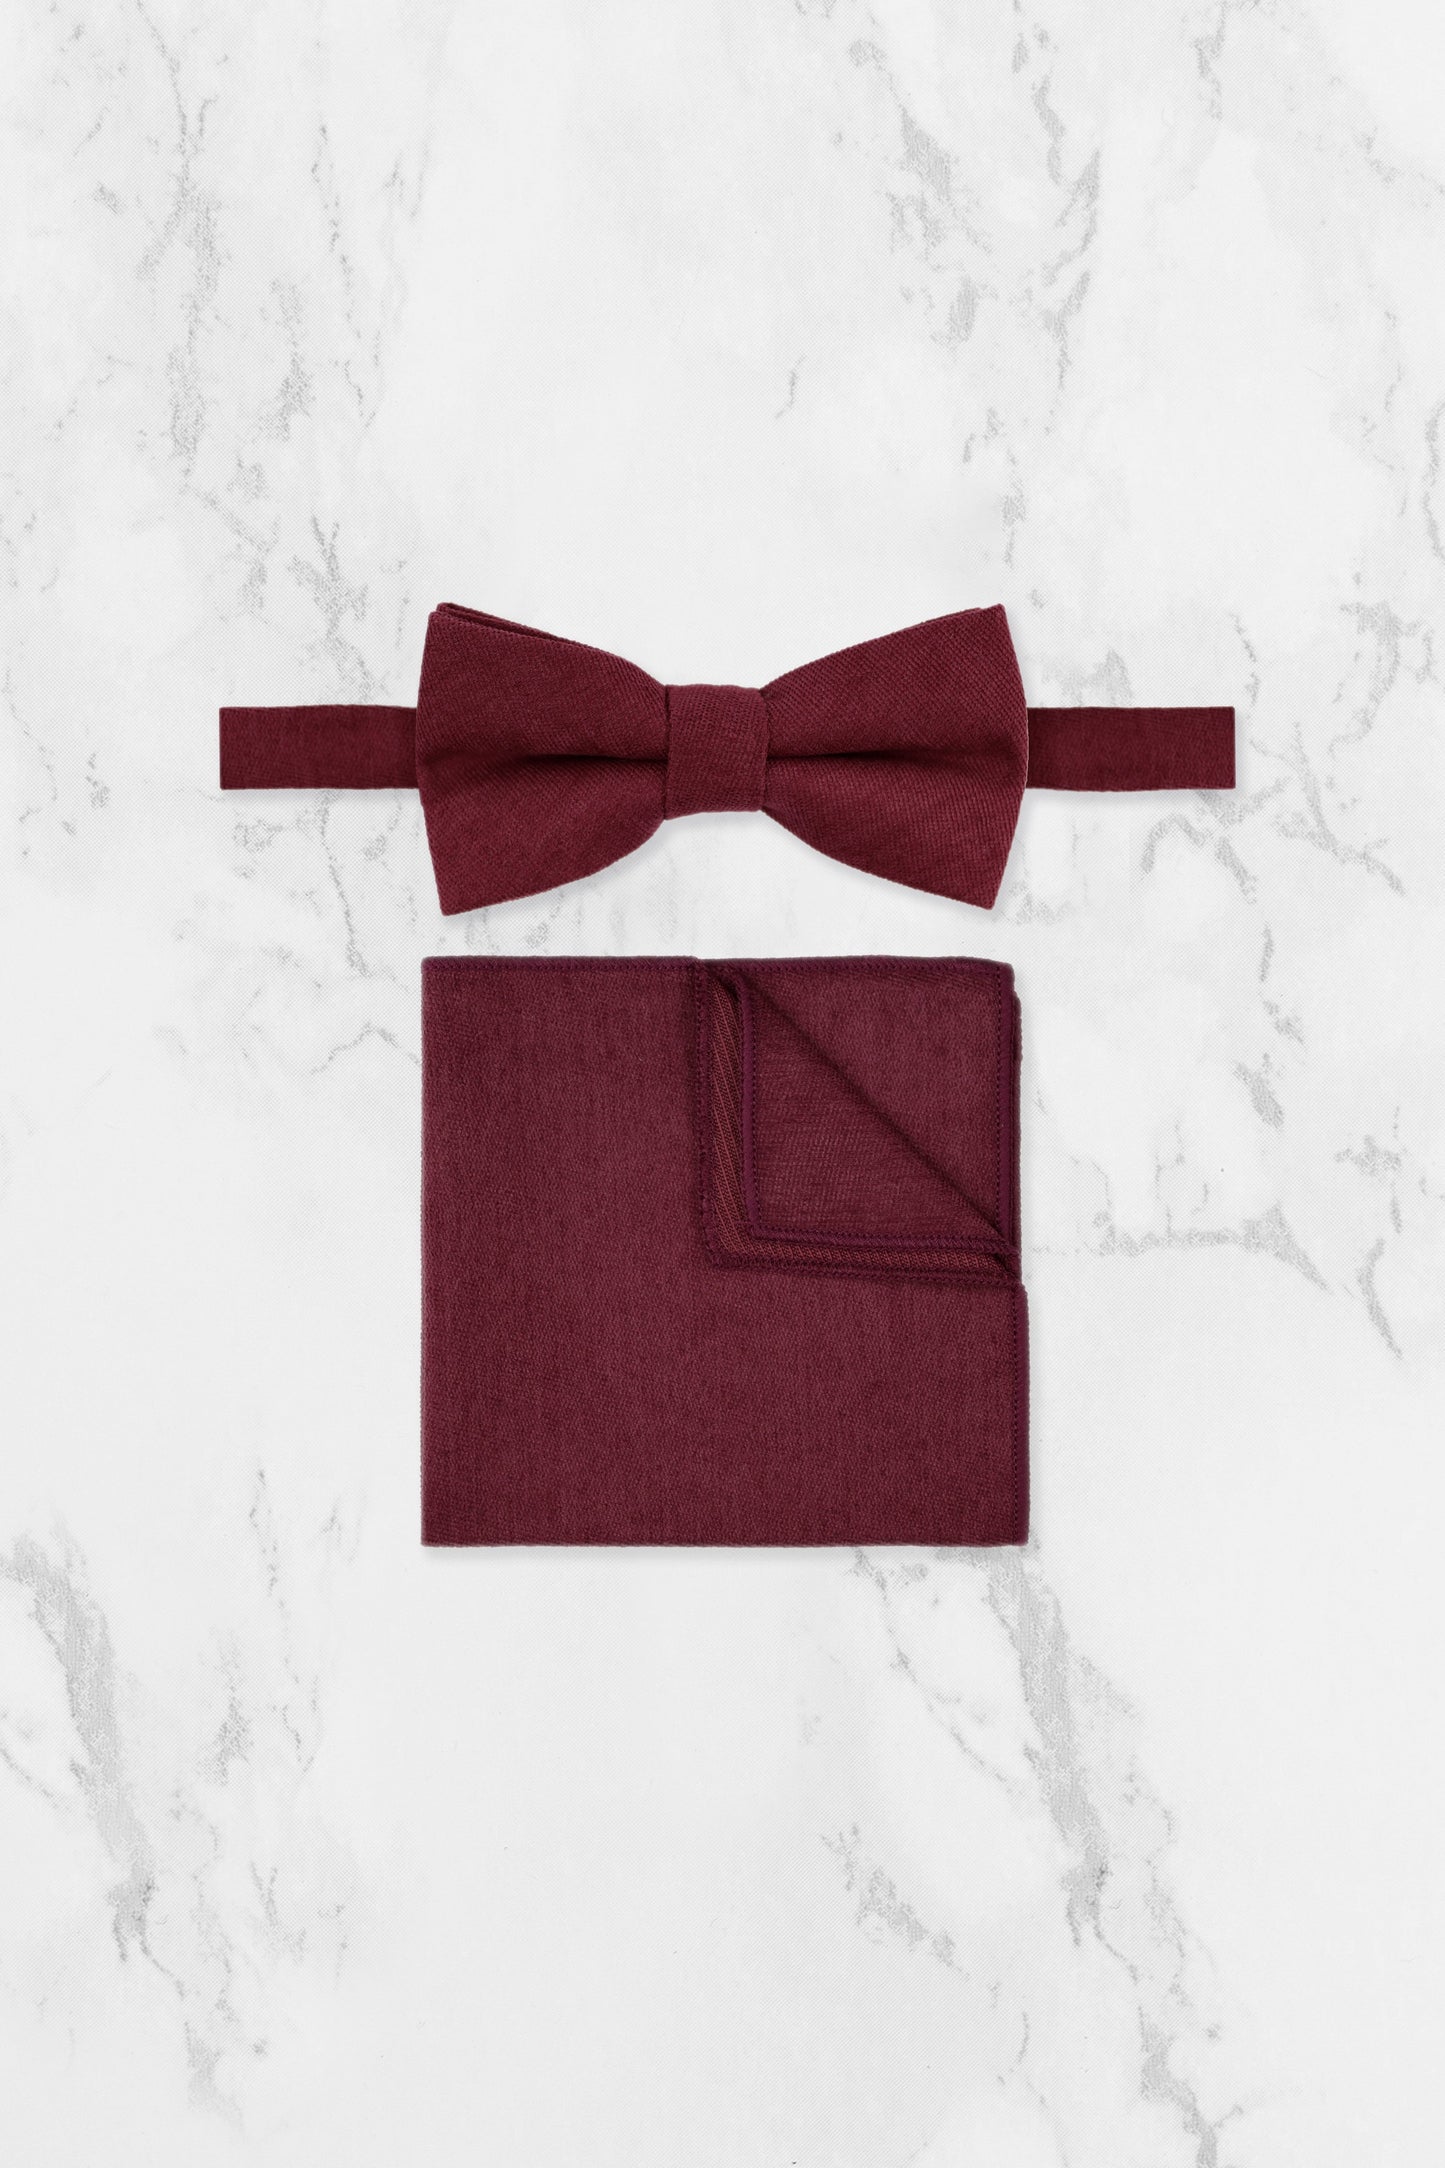 100% Brushed Cotton Suede Bow Tie - Burgundy Red